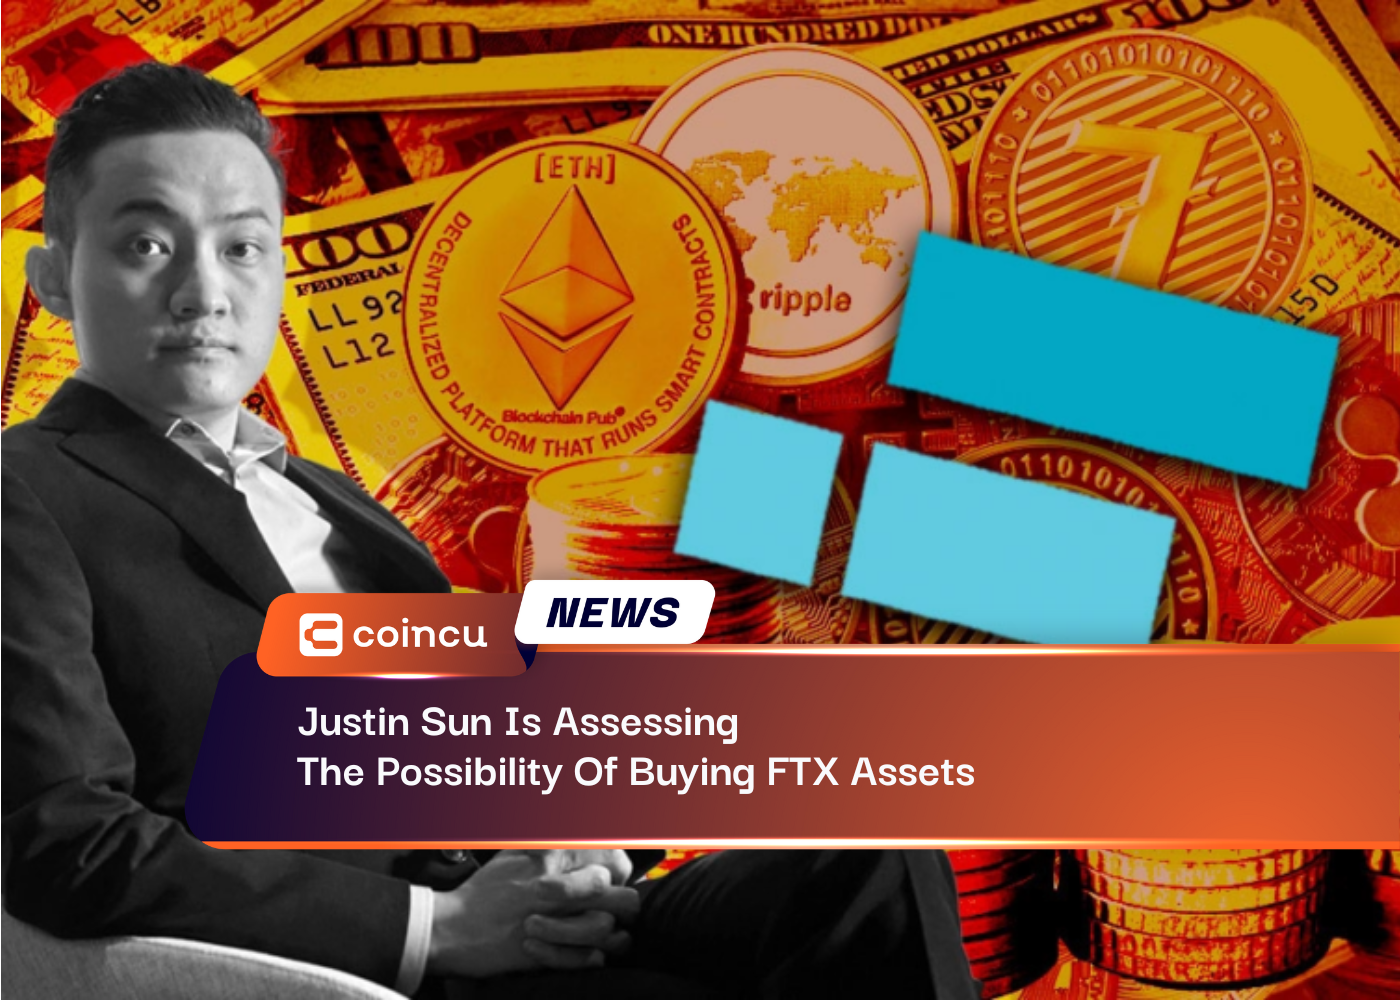 Justin Sun Is Assessing The Possibility Of Buying FTX Assets